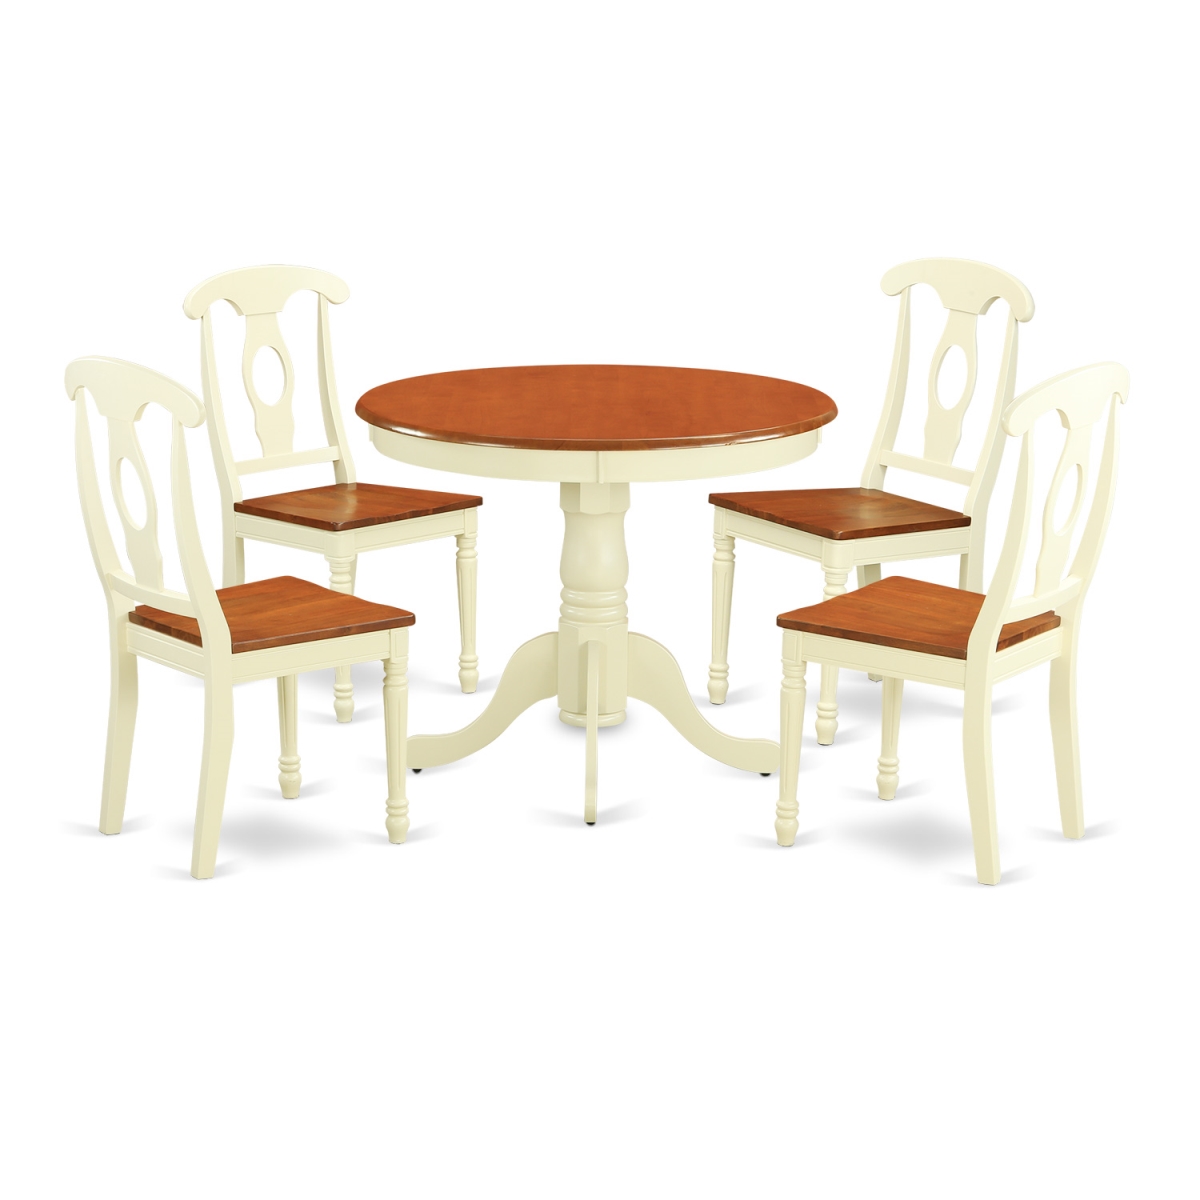 Kitchen Dinette Set With 4 Table & 4 Chairs, Buttermilk & Cherry - 5 Piece